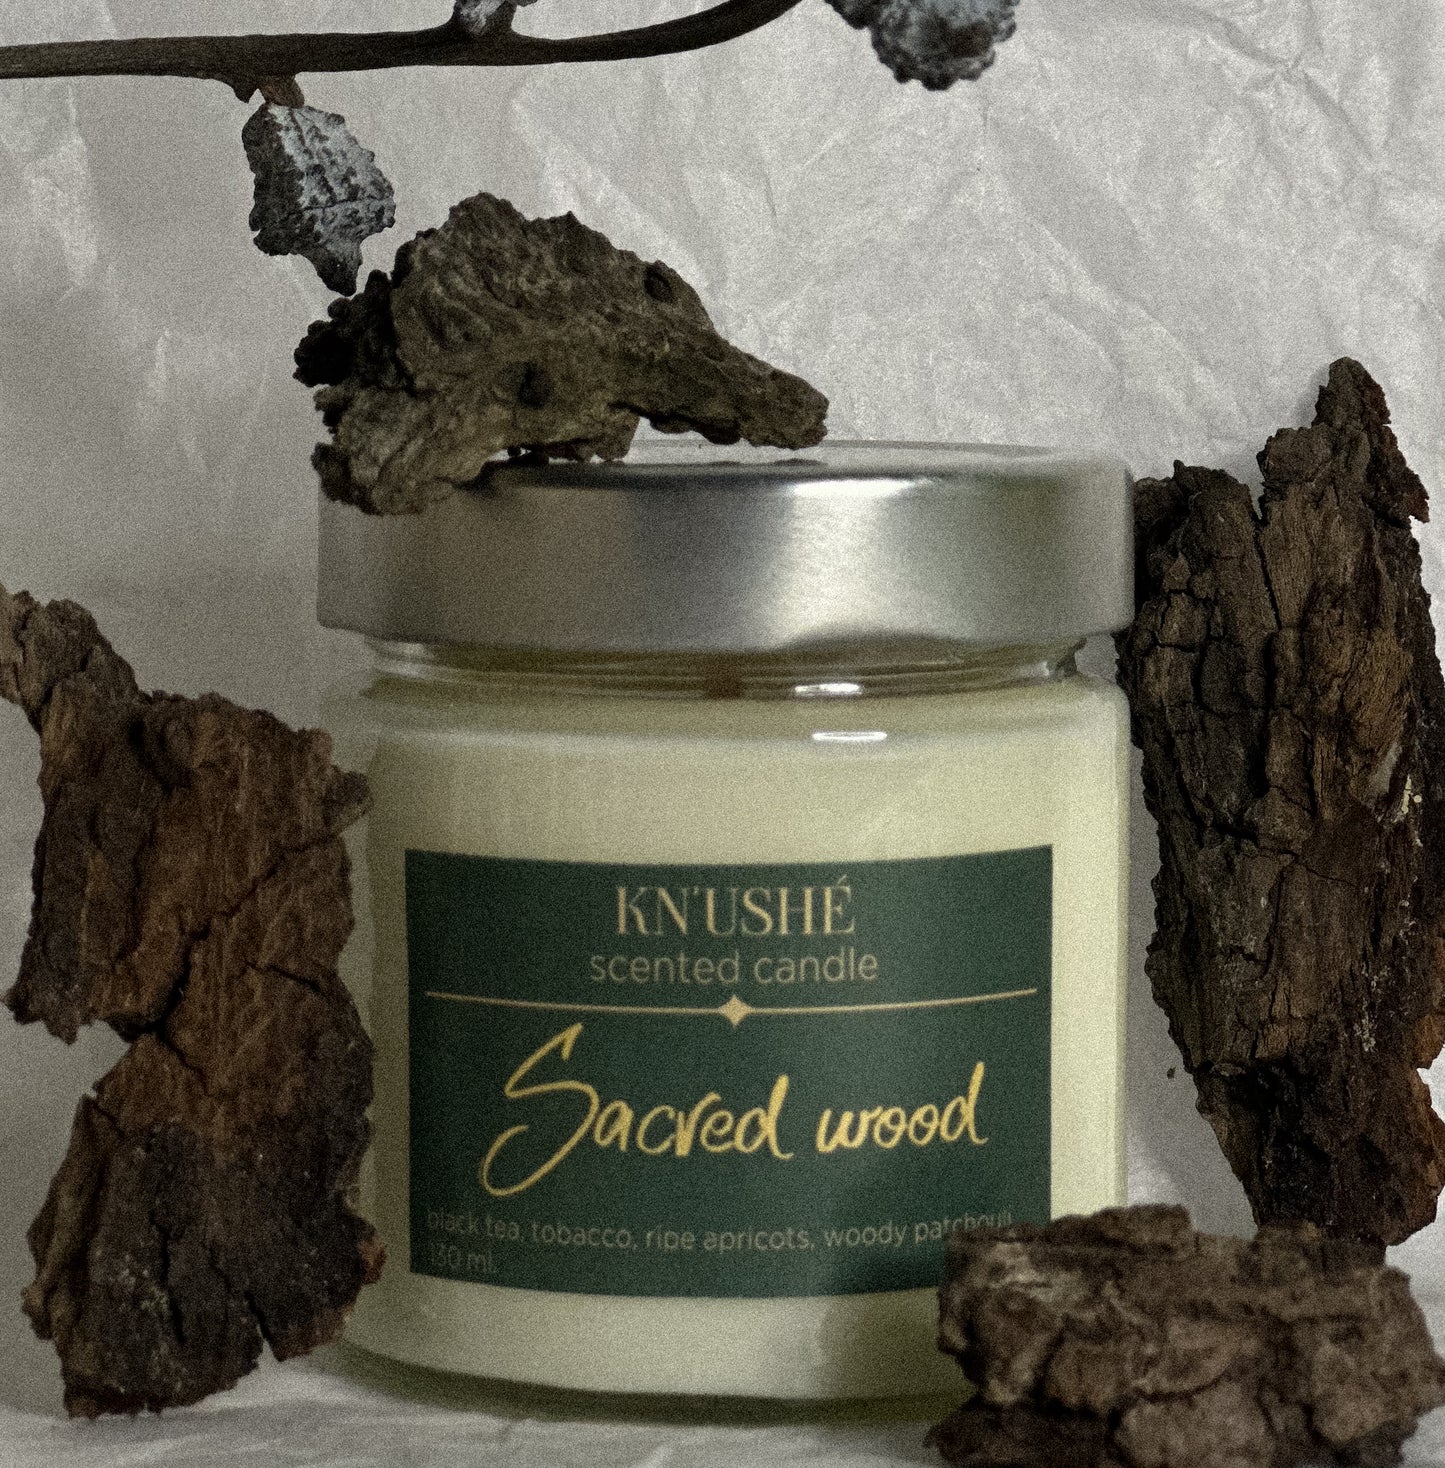 Scented candle made of vegetable soy wax with "Sacred wood" scent